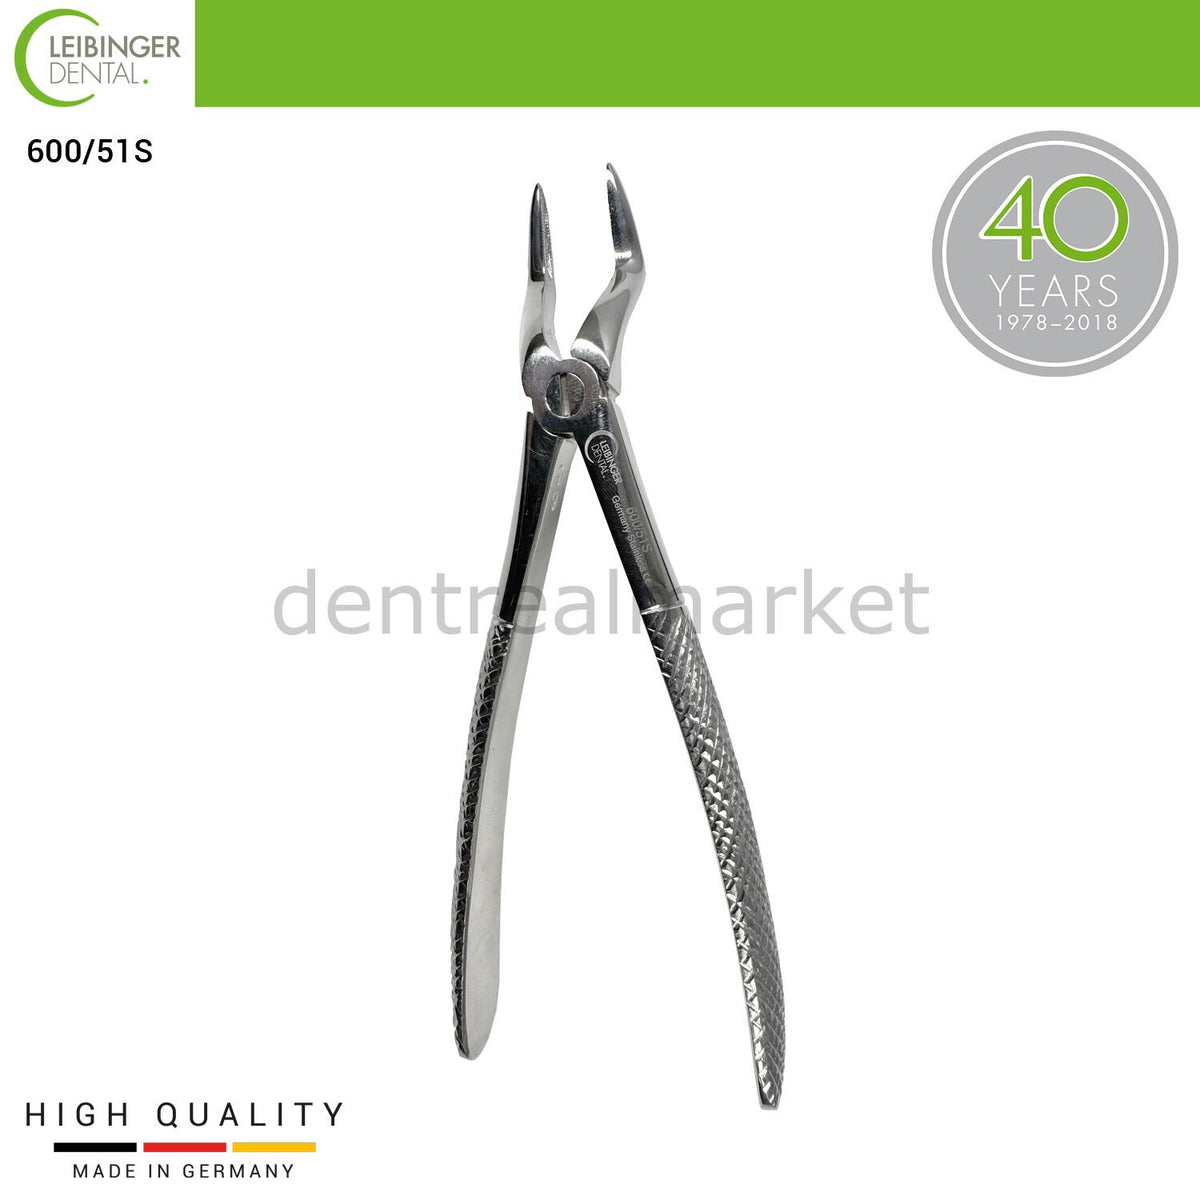 DentrealStore - Leibinger Adult Extracting Forceps 51S - Forceps for Upper Roots